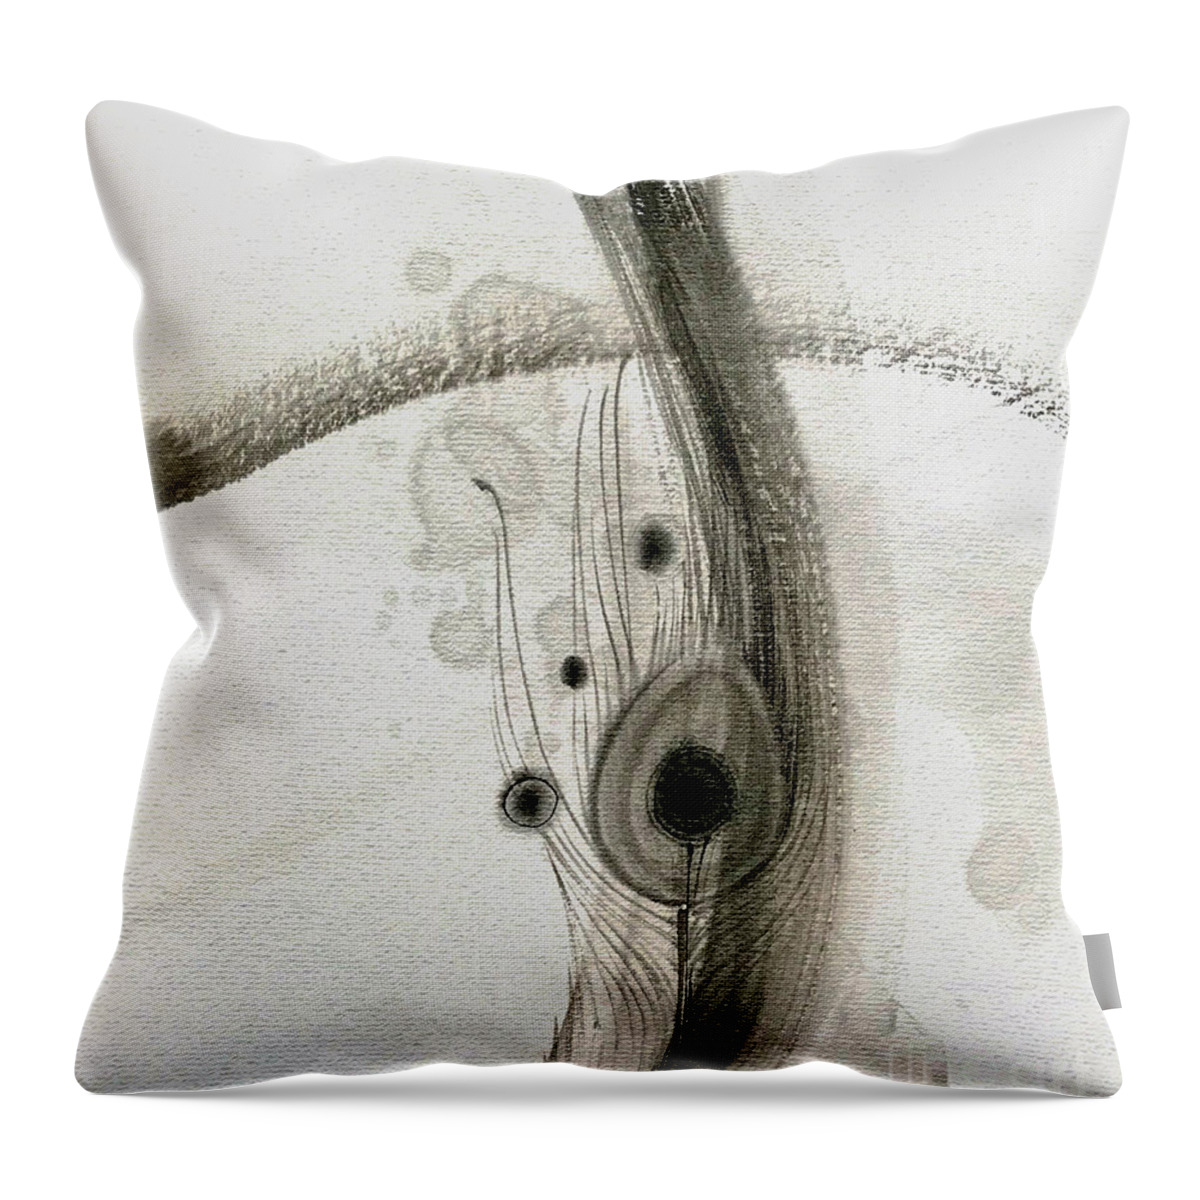 Japanese Throw Pillow featuring the painting Cure 4 by Fumiyo Yoshikawa